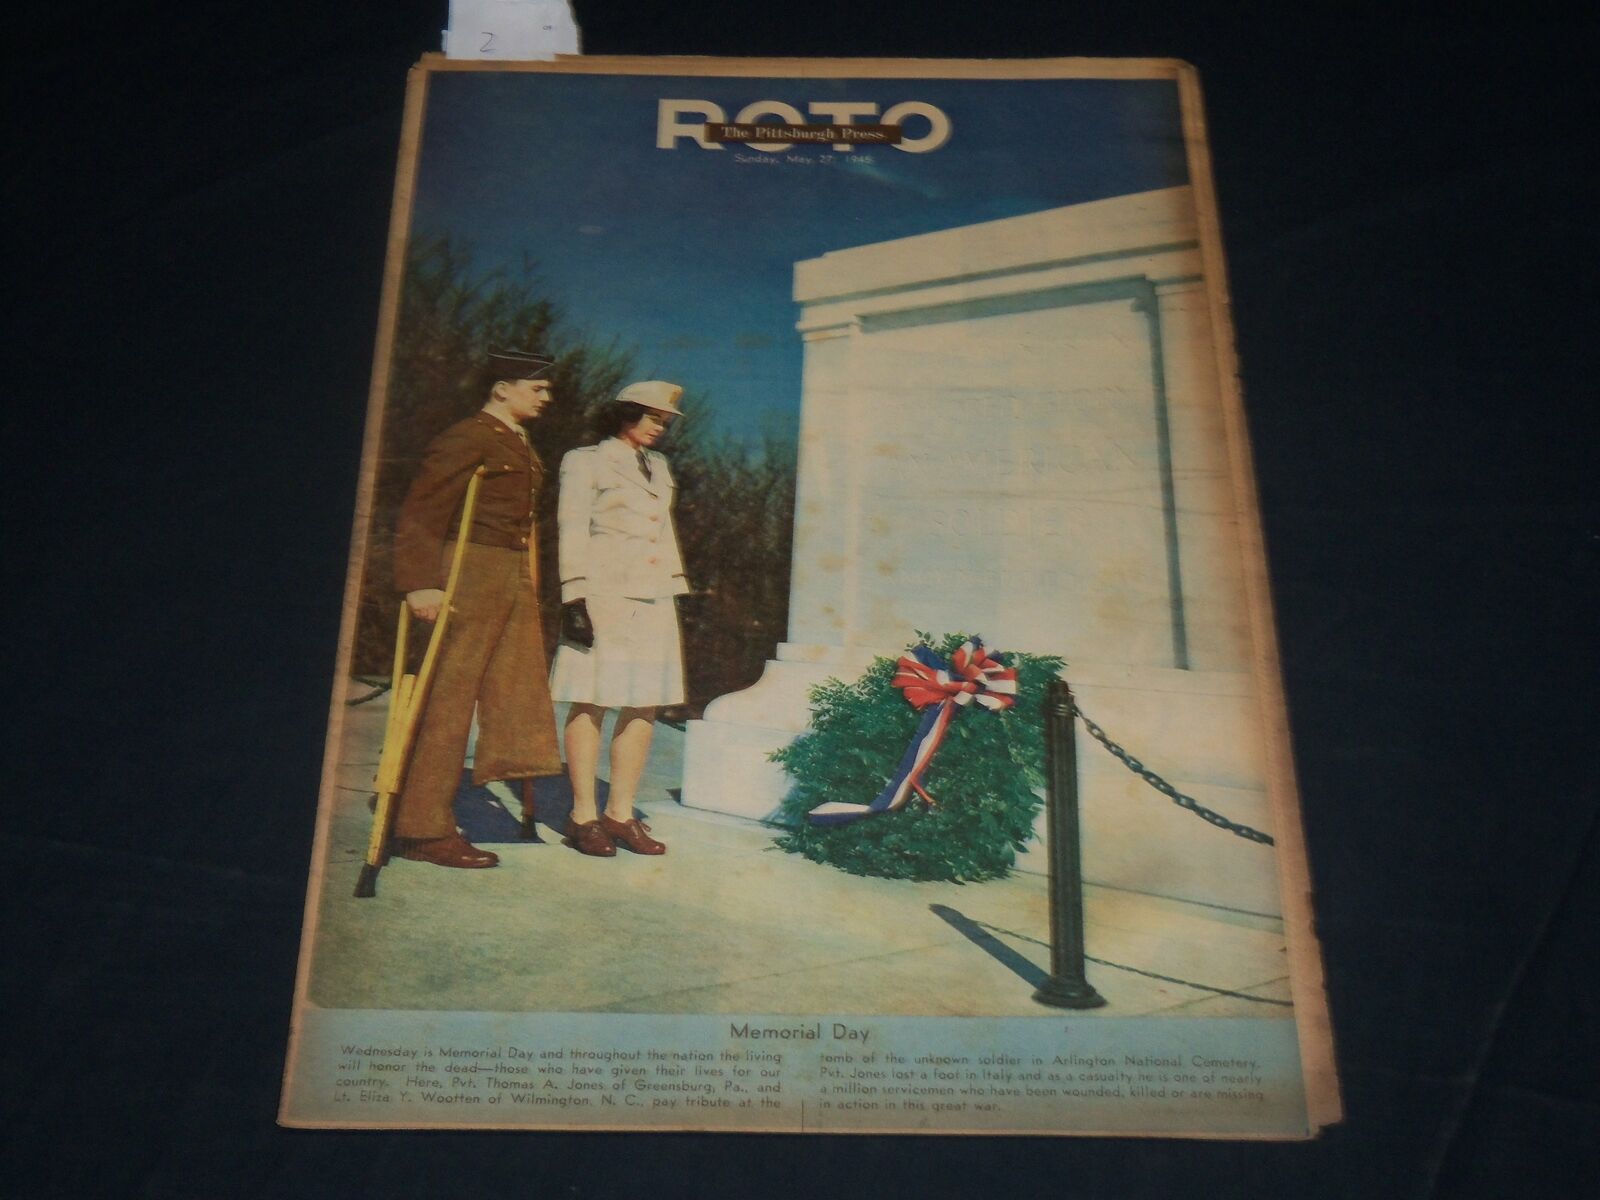 1945 MAY 27 THE PITTSBURGH PRESS SUNDAY ROTO SECTION - MEMORIAL DAY - NP 4578